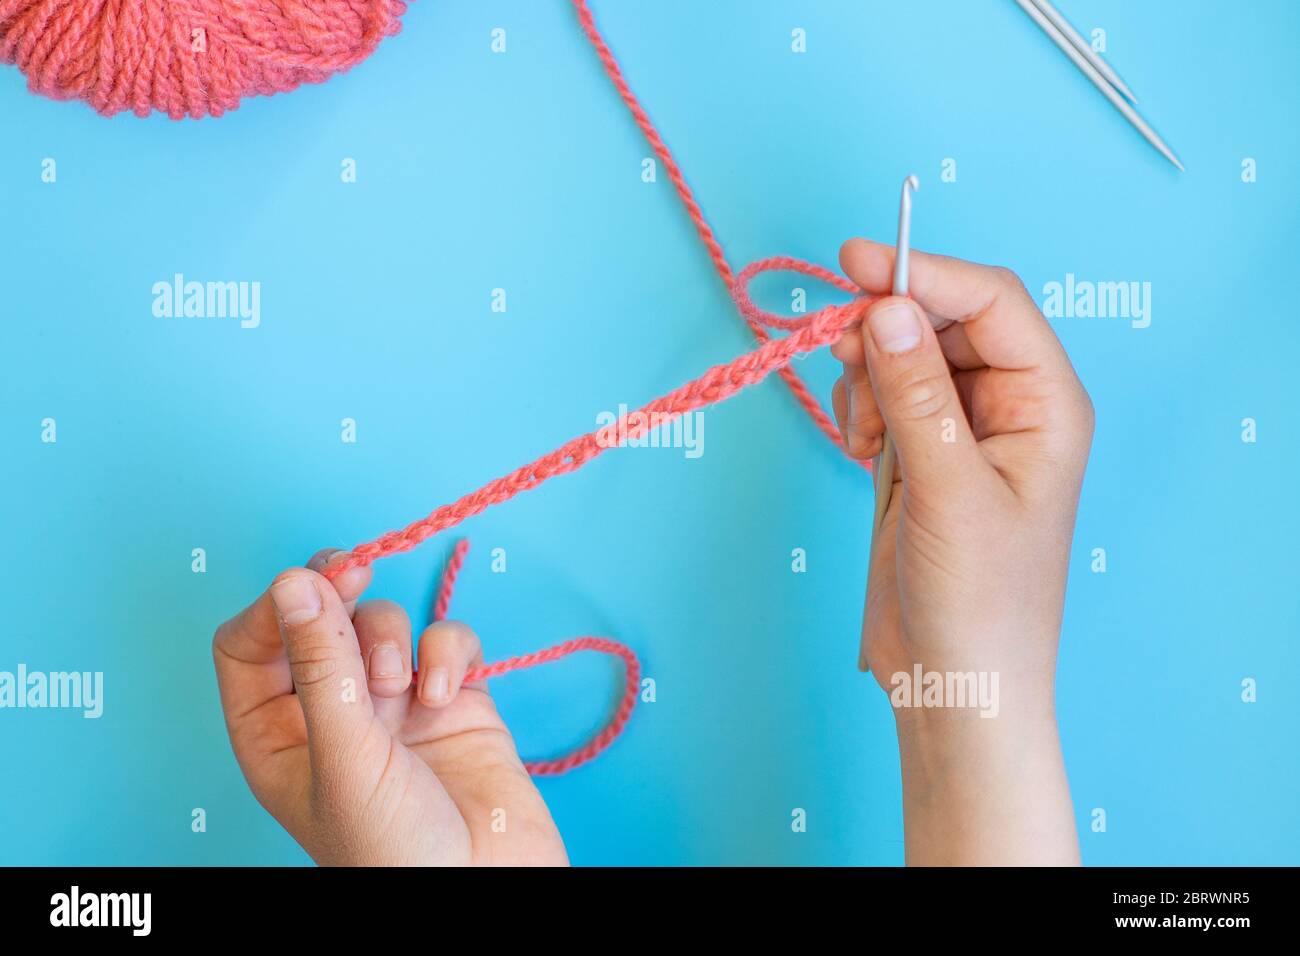 Step-by-step instructions for children how to crochet a bracelet from yarn Stock Photo